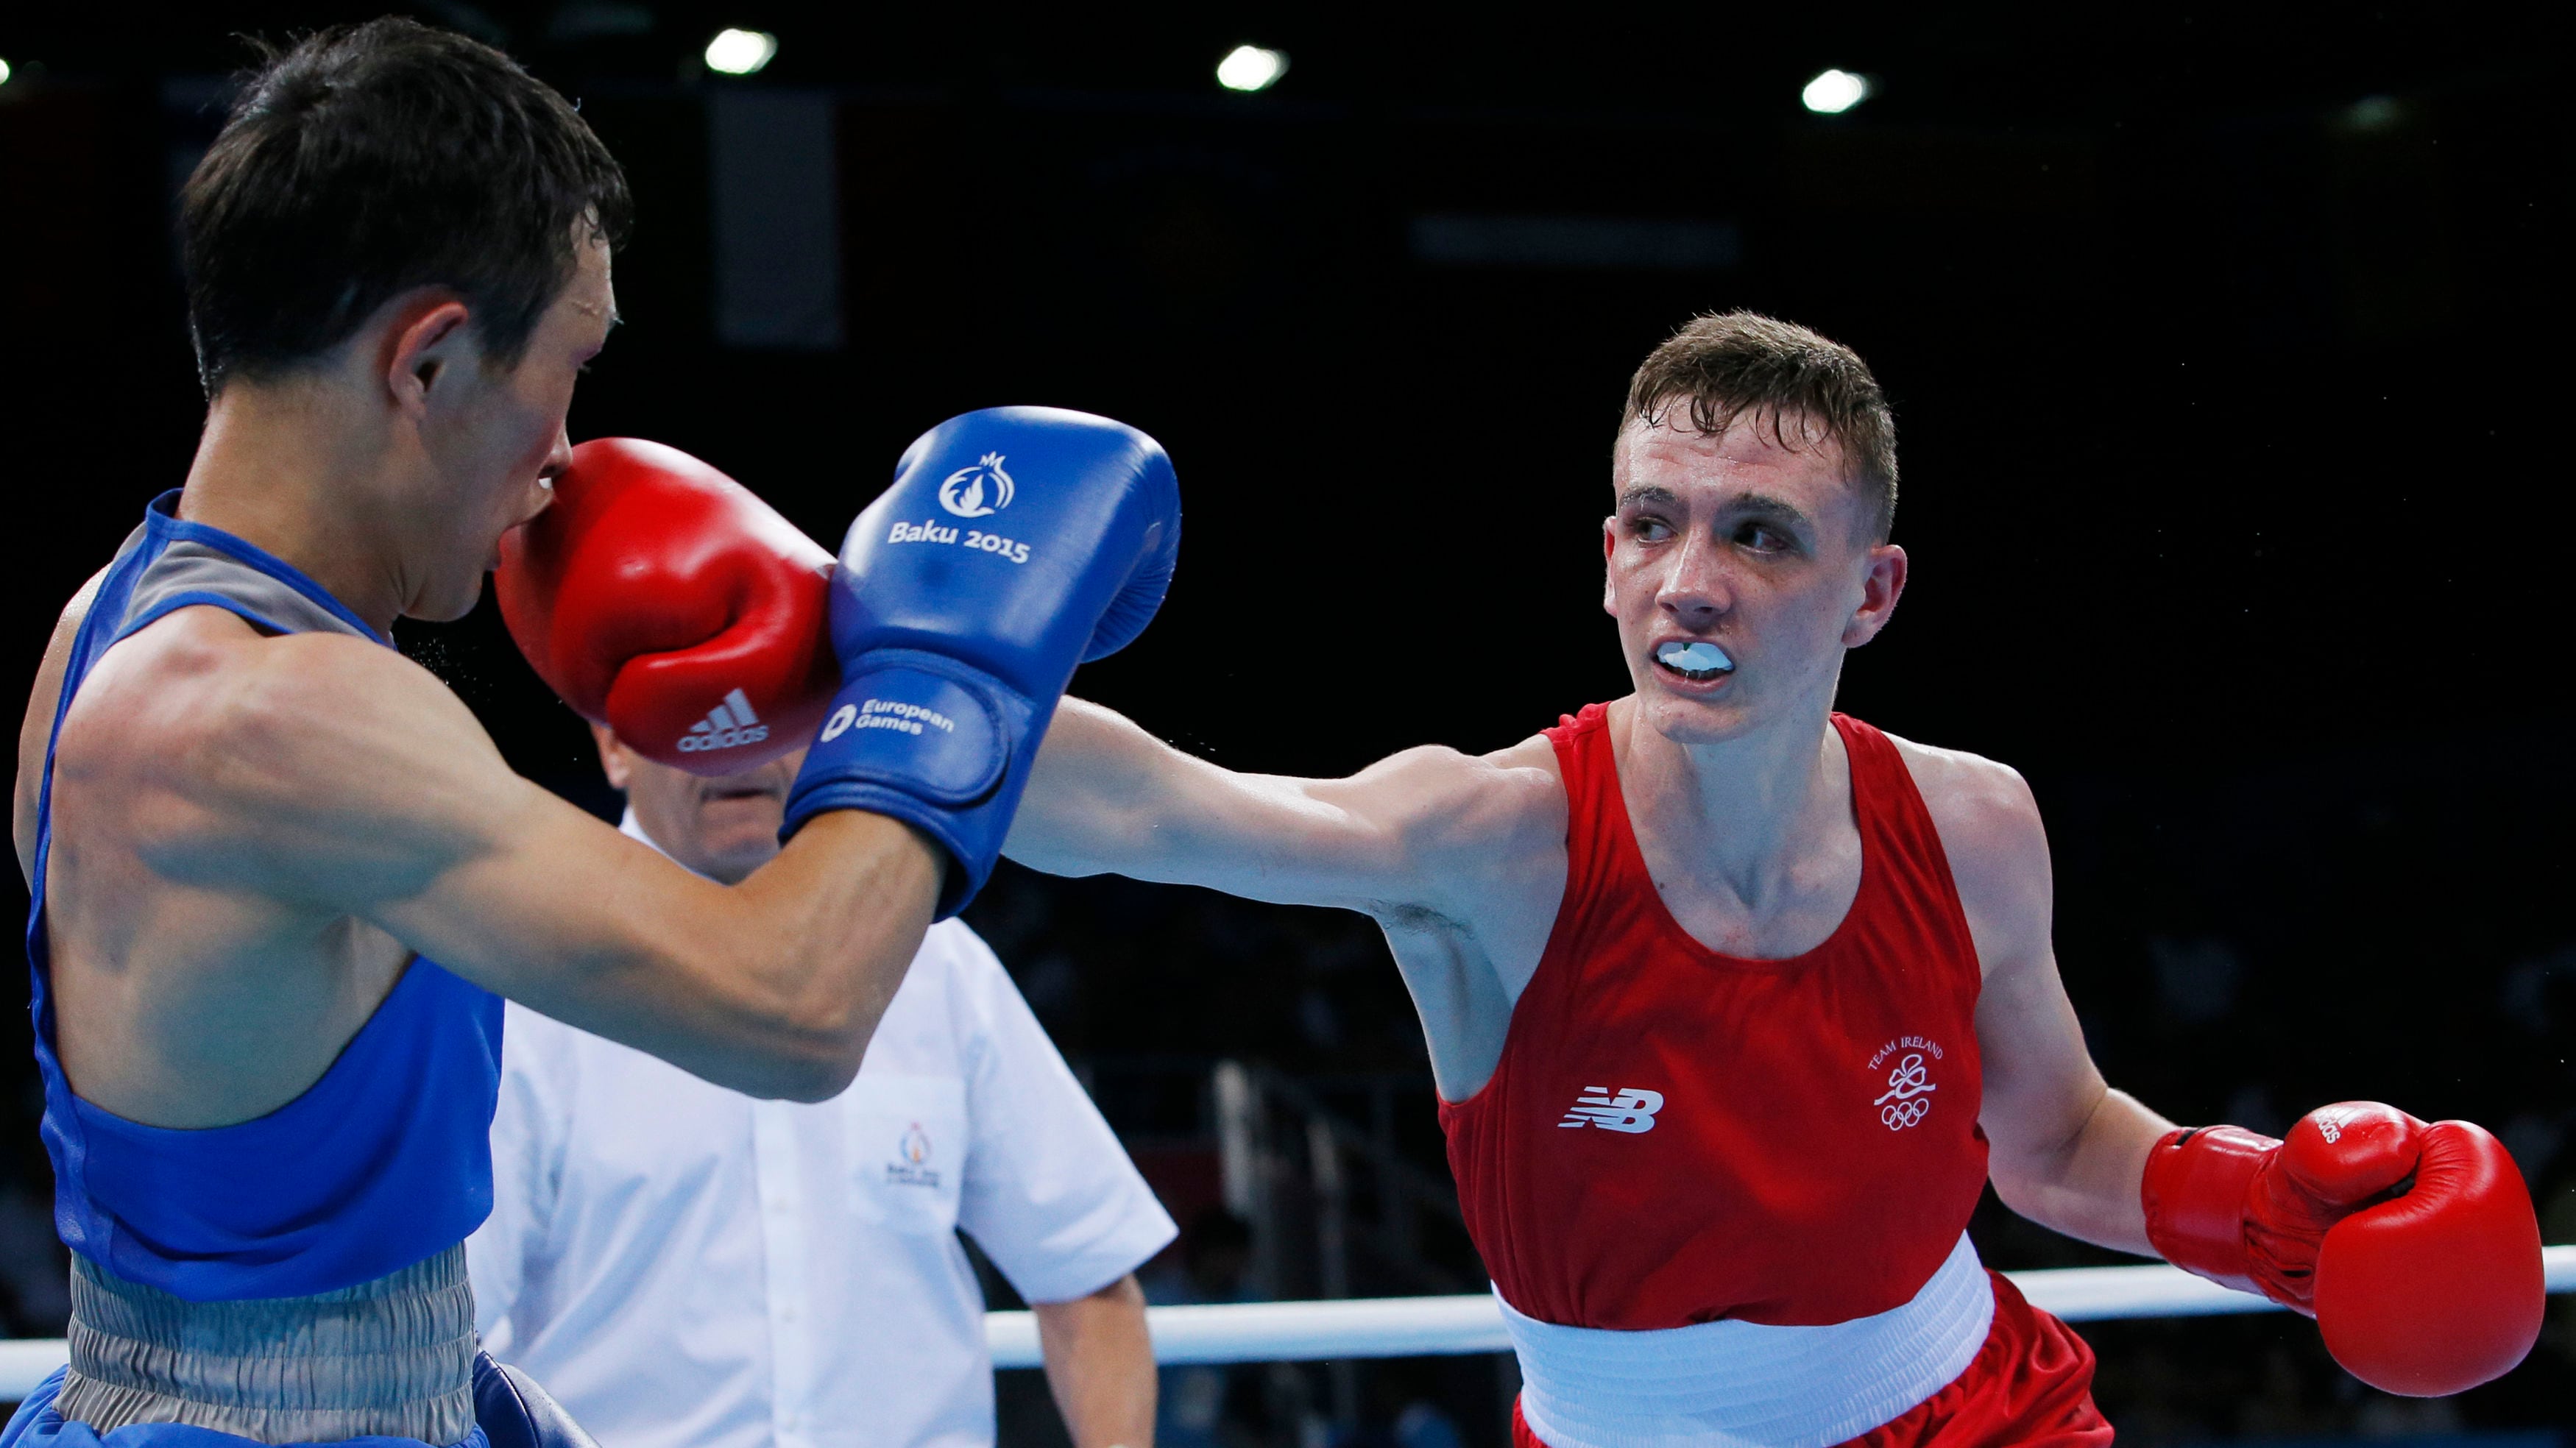 Ireland's Brendan Irvine lands a blow on Bator Sagaluev of Russia during the 49kg final at the European Games in Baku<br />Picture: AP